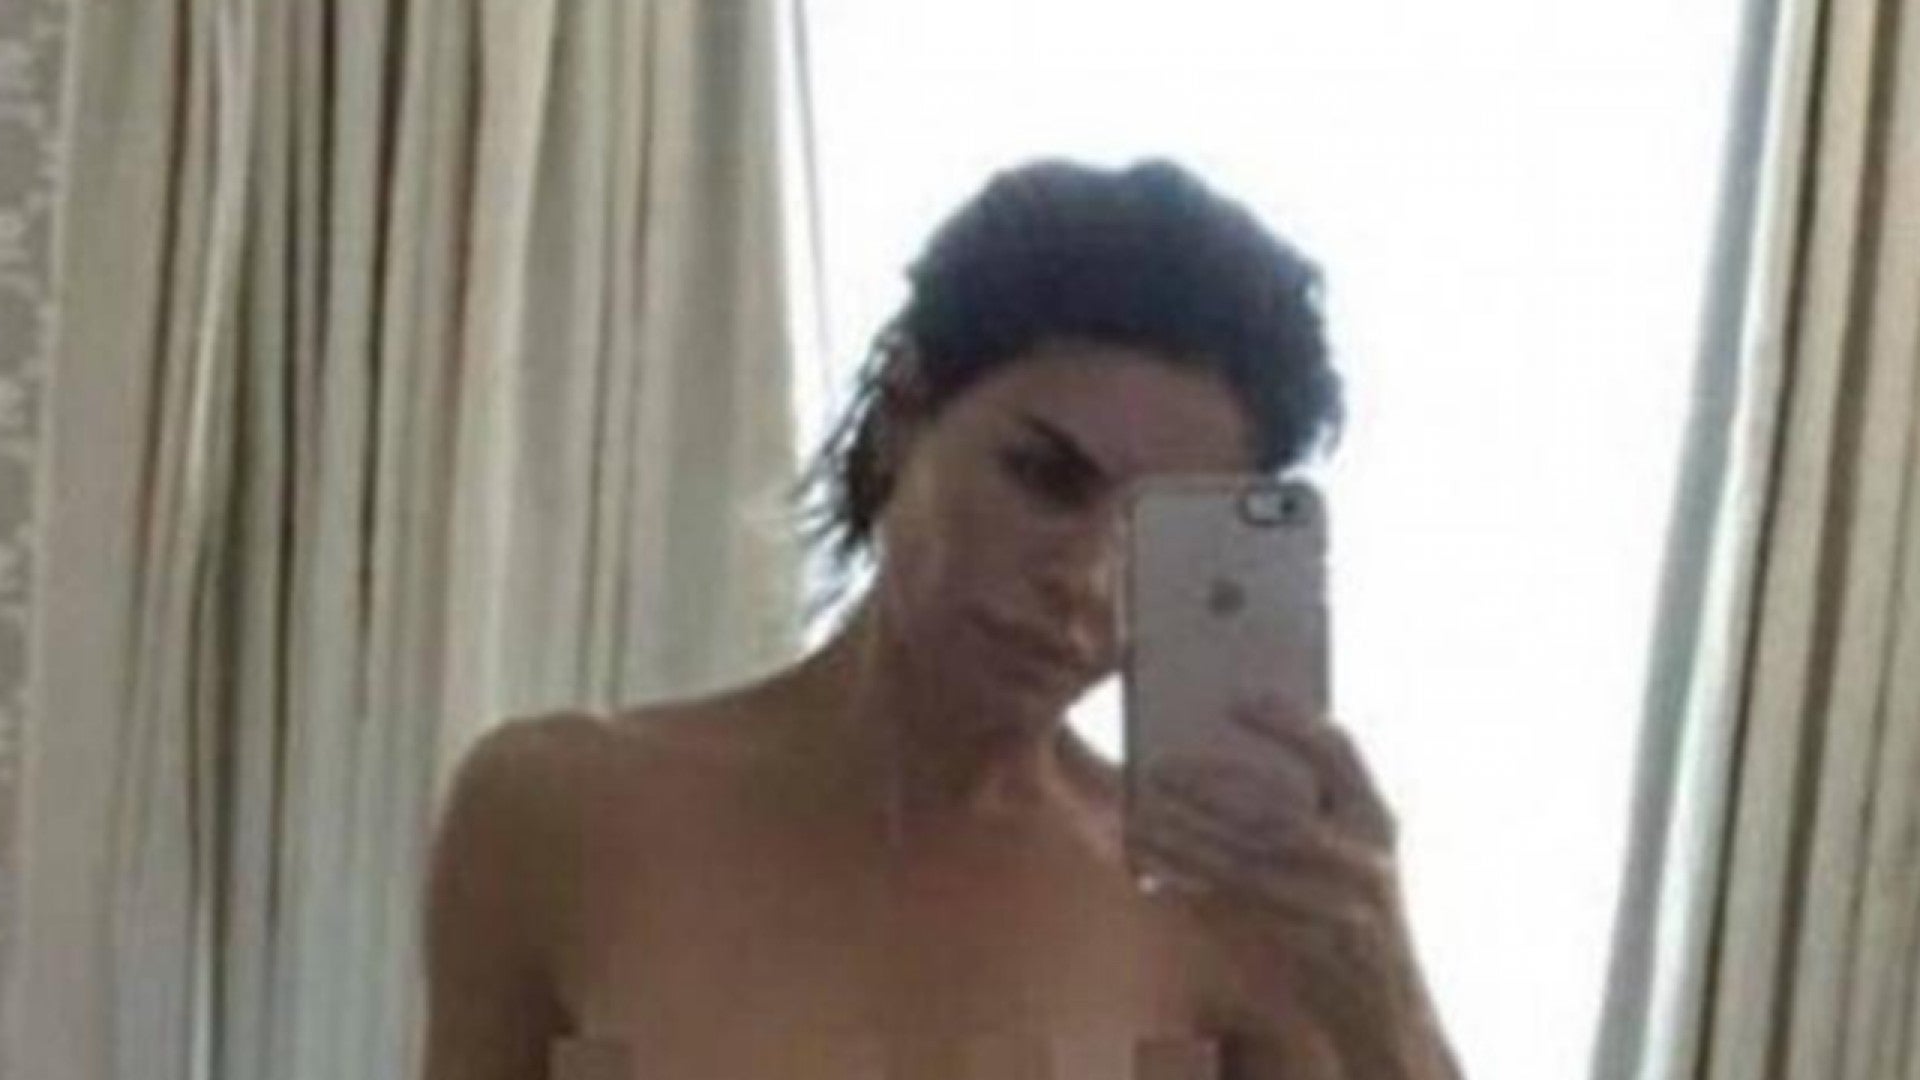 Lisa Rinna Flaunts Her Figure in Completely Nude Selfie -- See the Sexy Pic! image pic image